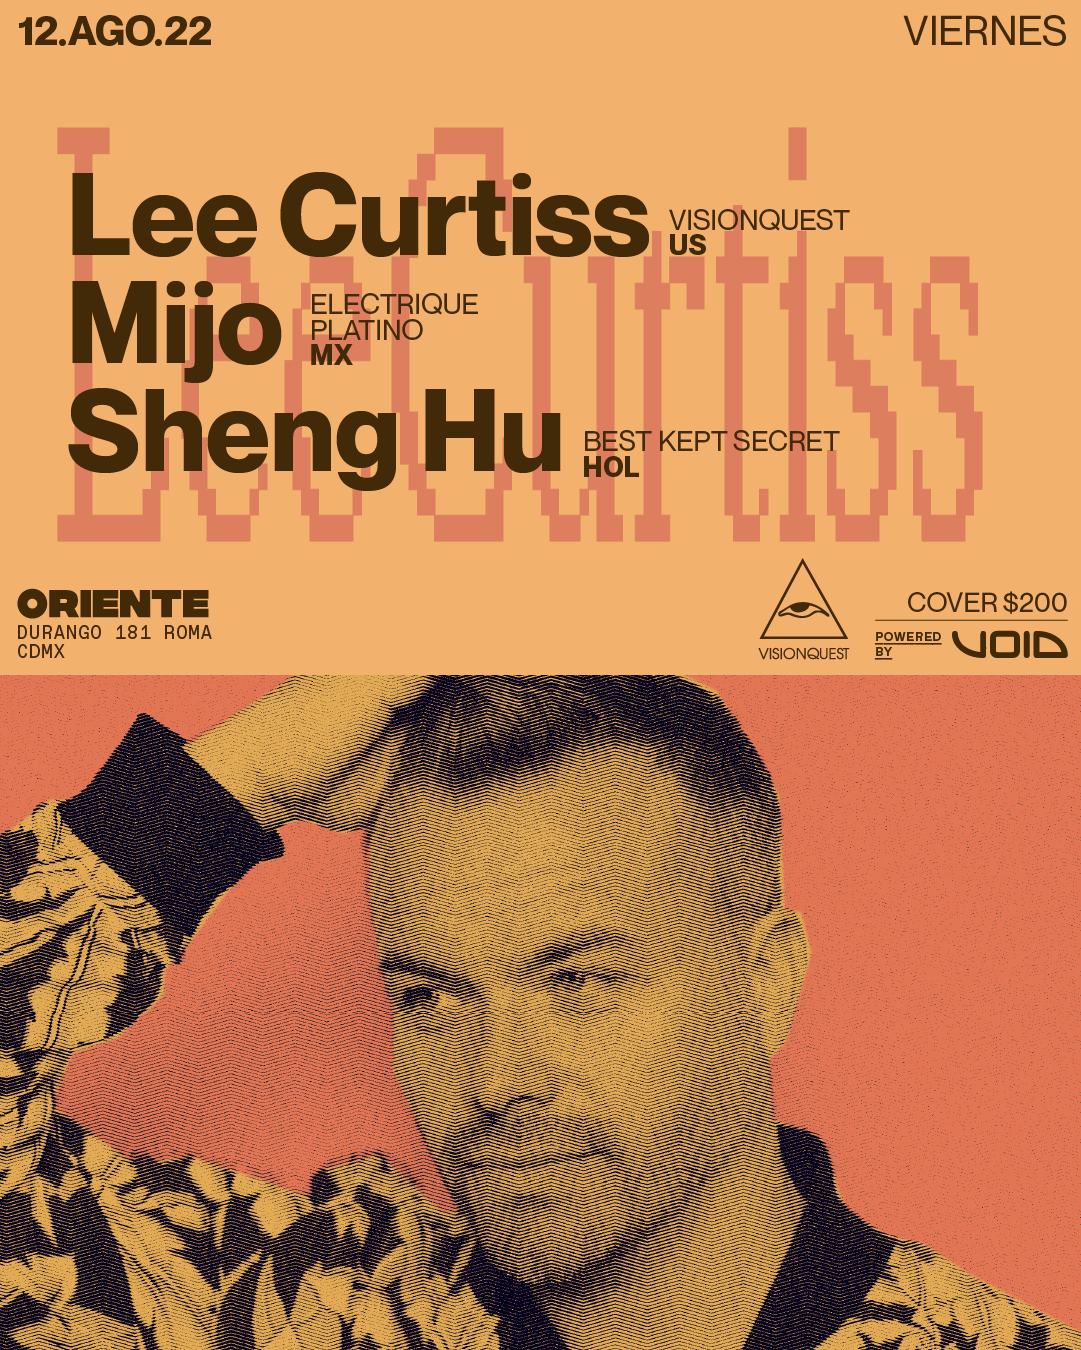 Lee Curtiss (Visionquest), Mijo (Electrique / Platino) and Sheng Hu - フライヤー表